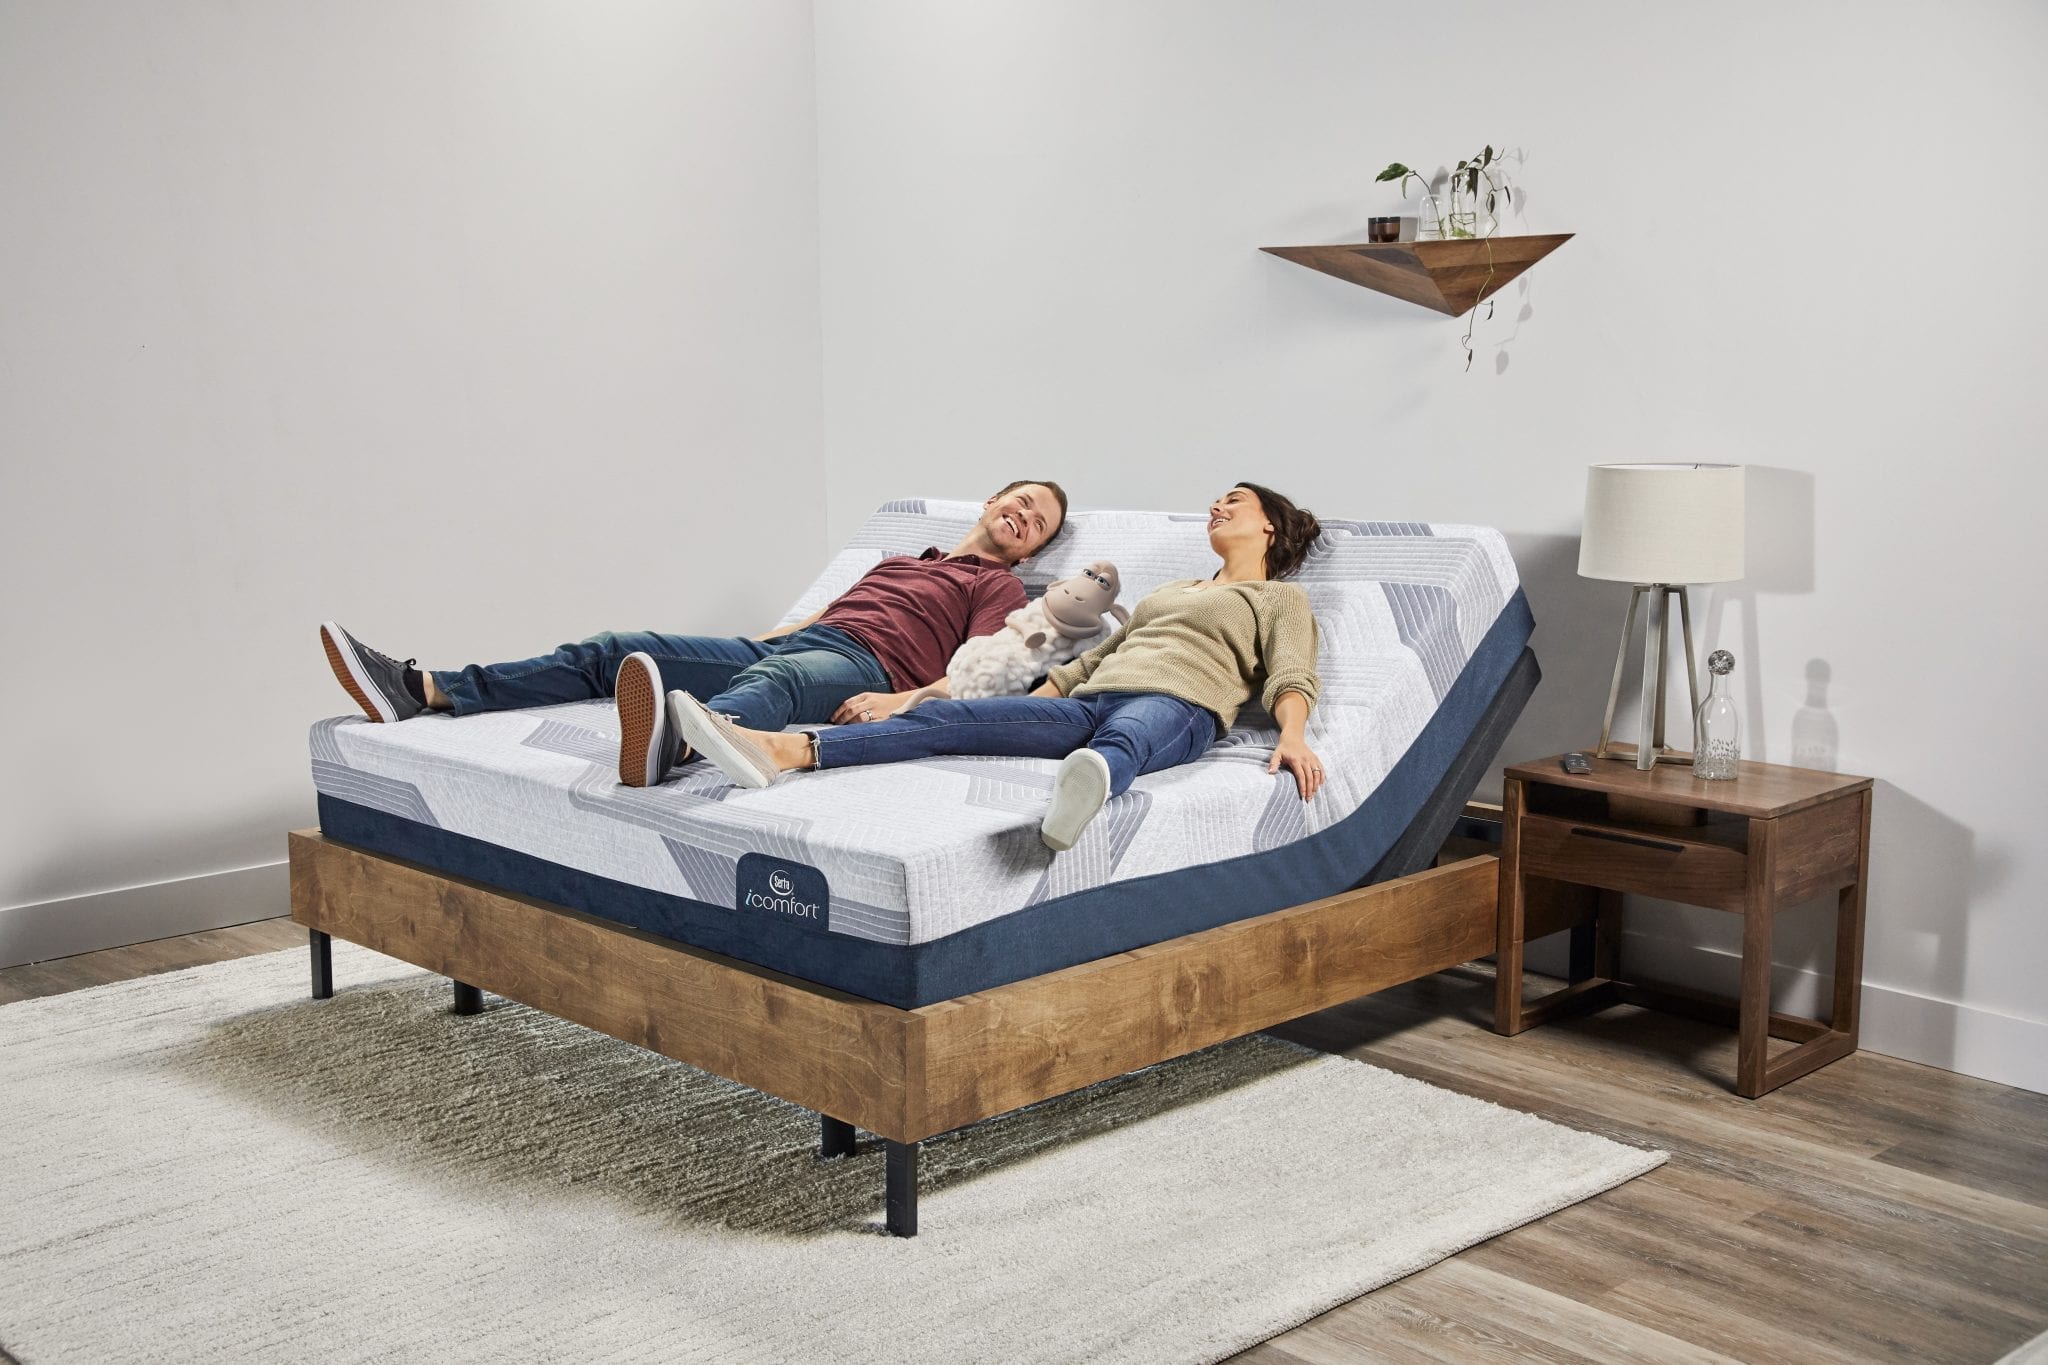 Man and woman laying on an iComfort mattress adjustable bed